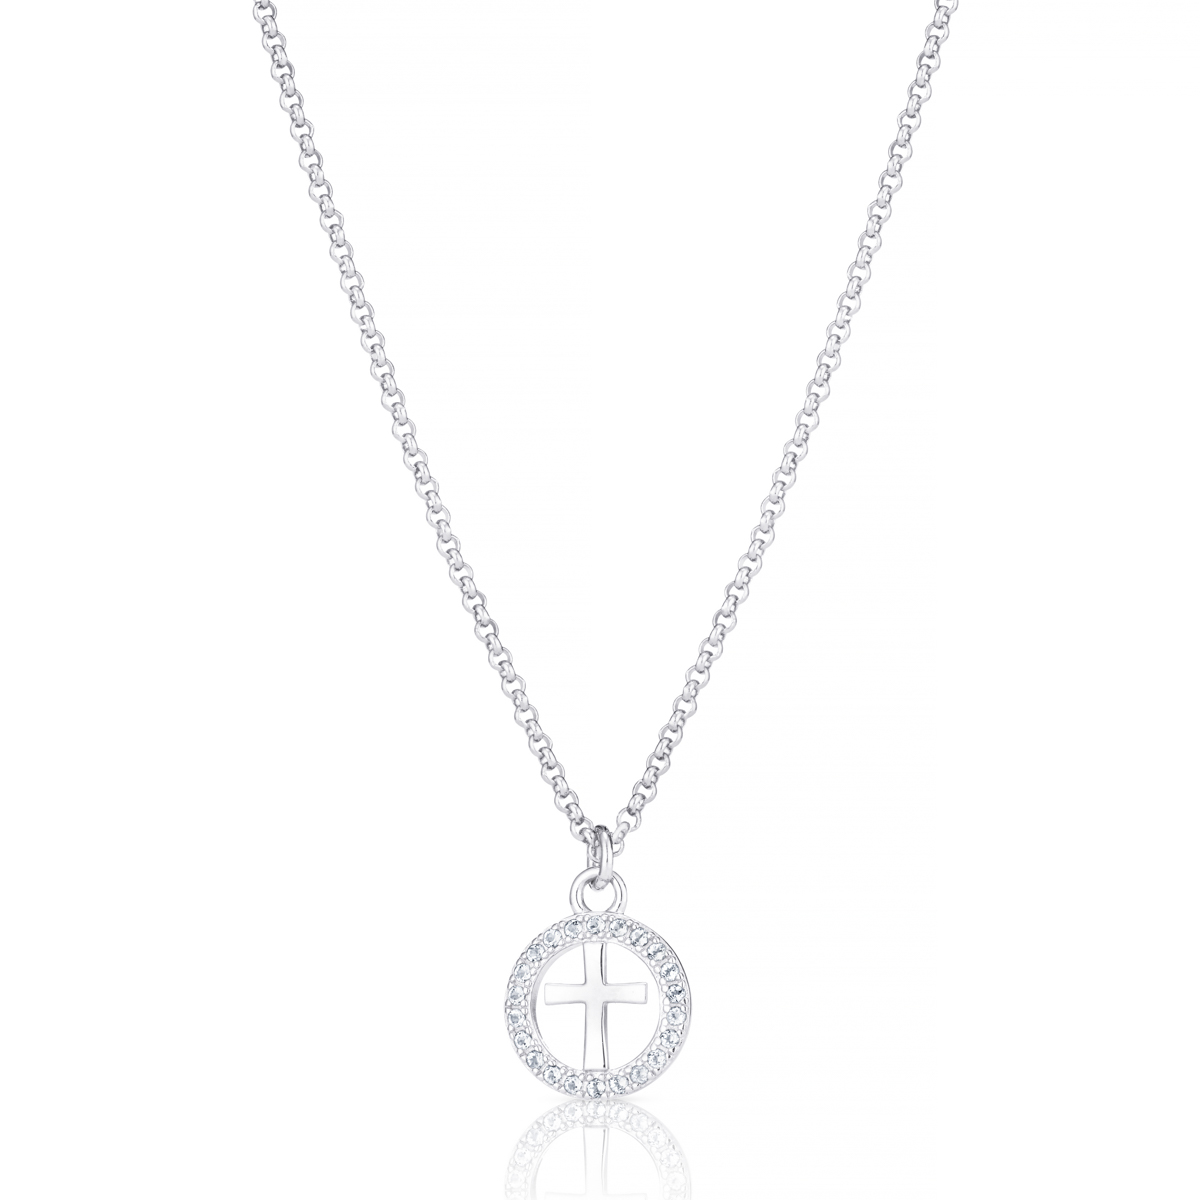 Sterling Silver White Topaz Halo Cross Necklace